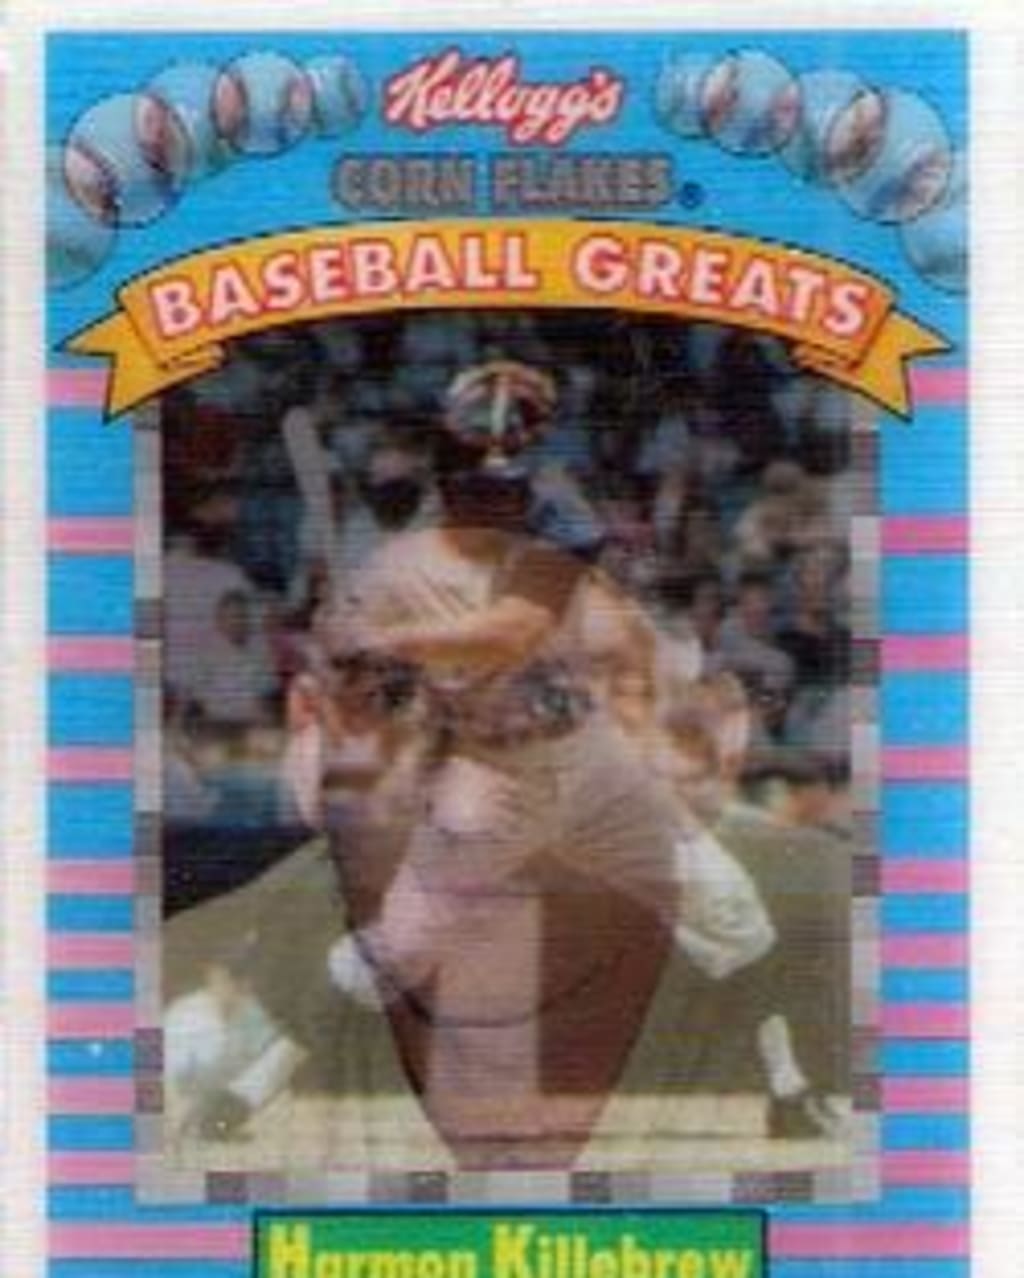 Will Clark Trading Cards: Values, Tracking & Hot Deals